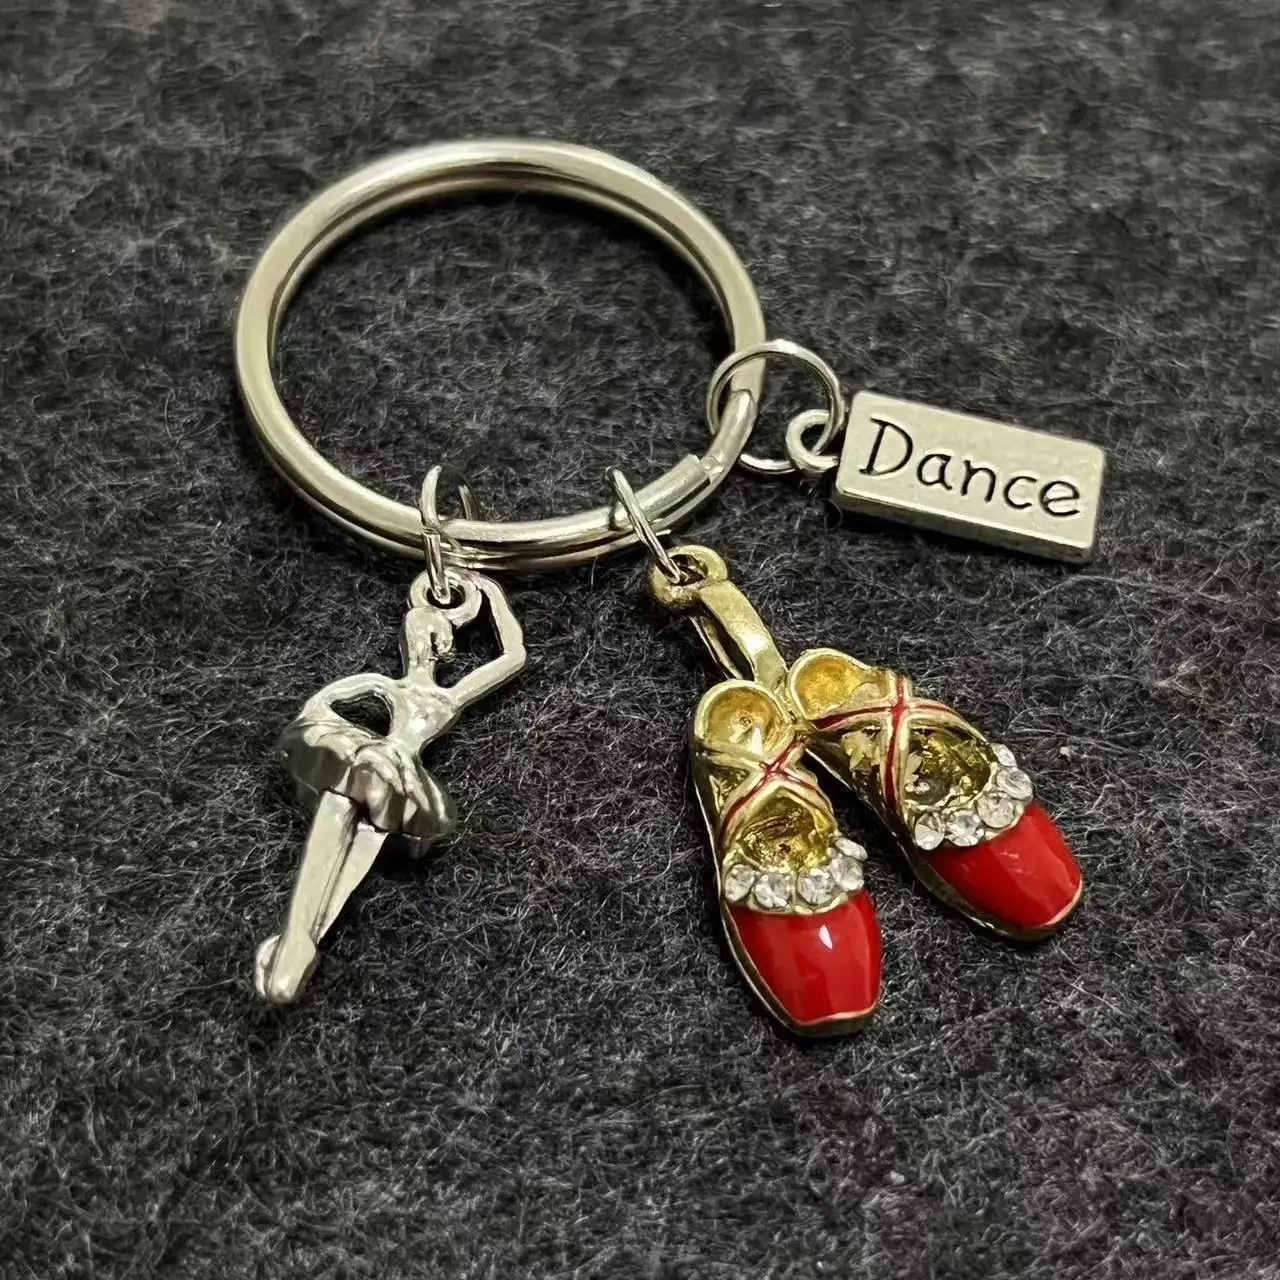 Dance accessories good quality hot sales personalized luxury keychain for dance ballet